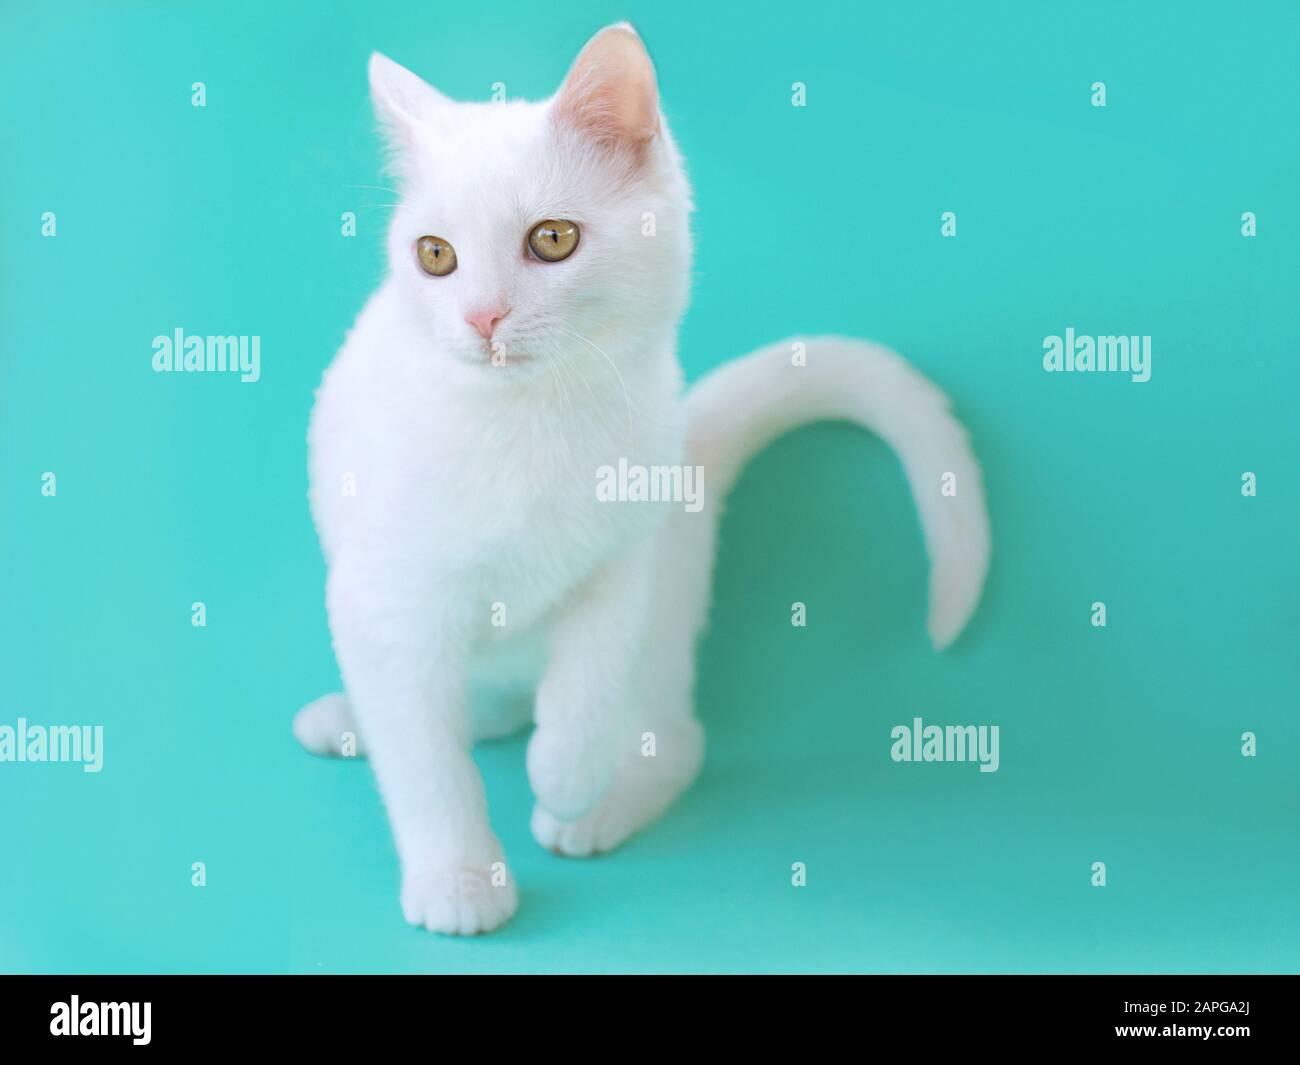 Cute sweet curious white kitty cat on menthol color background. Friend, pet, allergy, loneliness concept Stock Photo